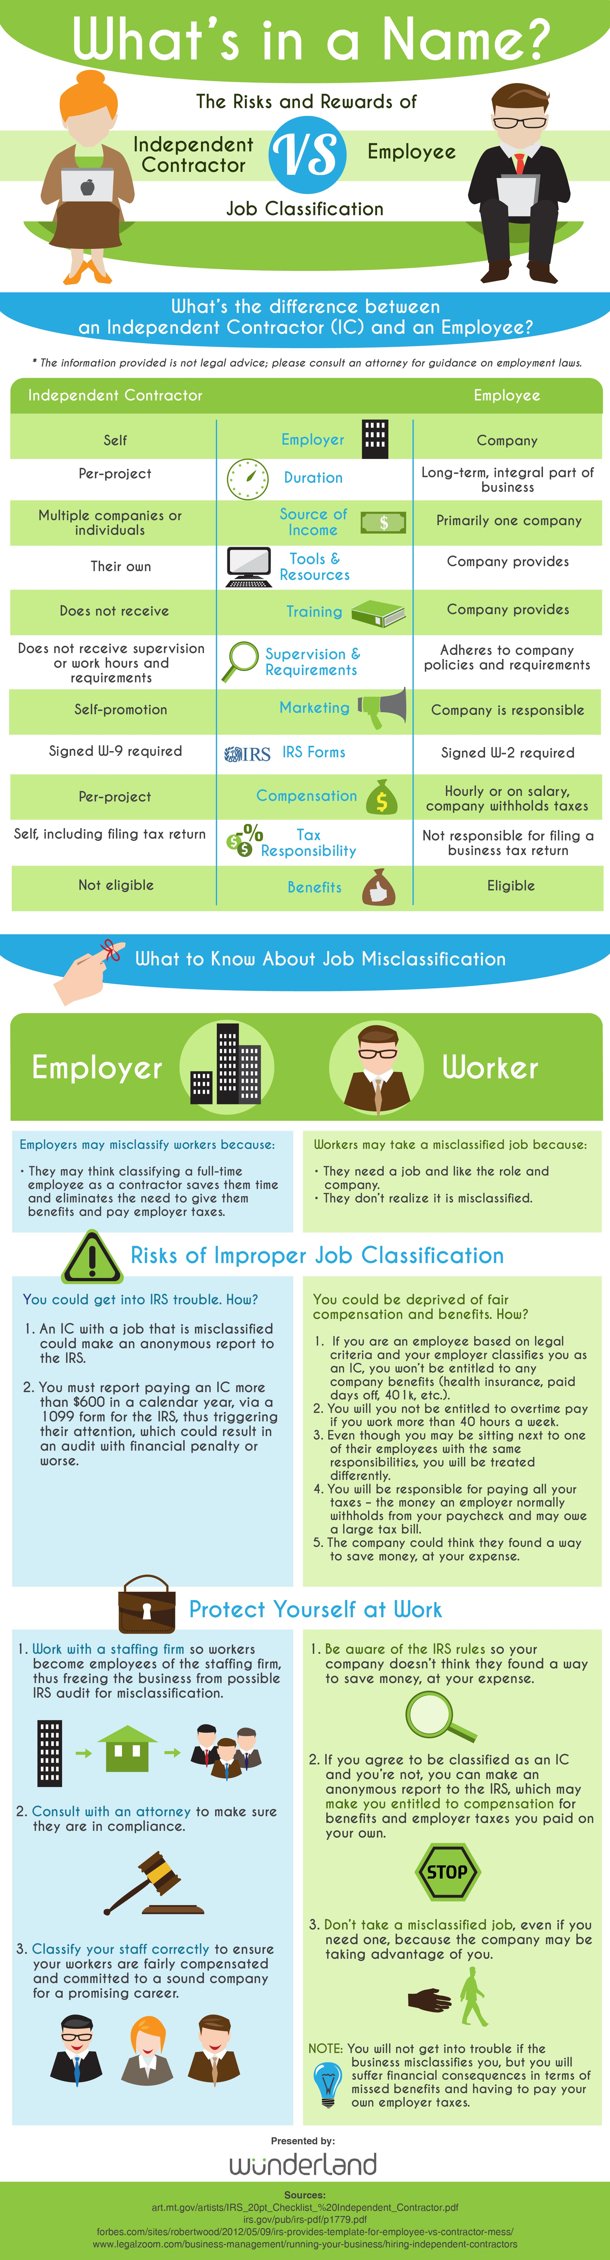 Contractor vs Employee Risks and Rewards Infographic